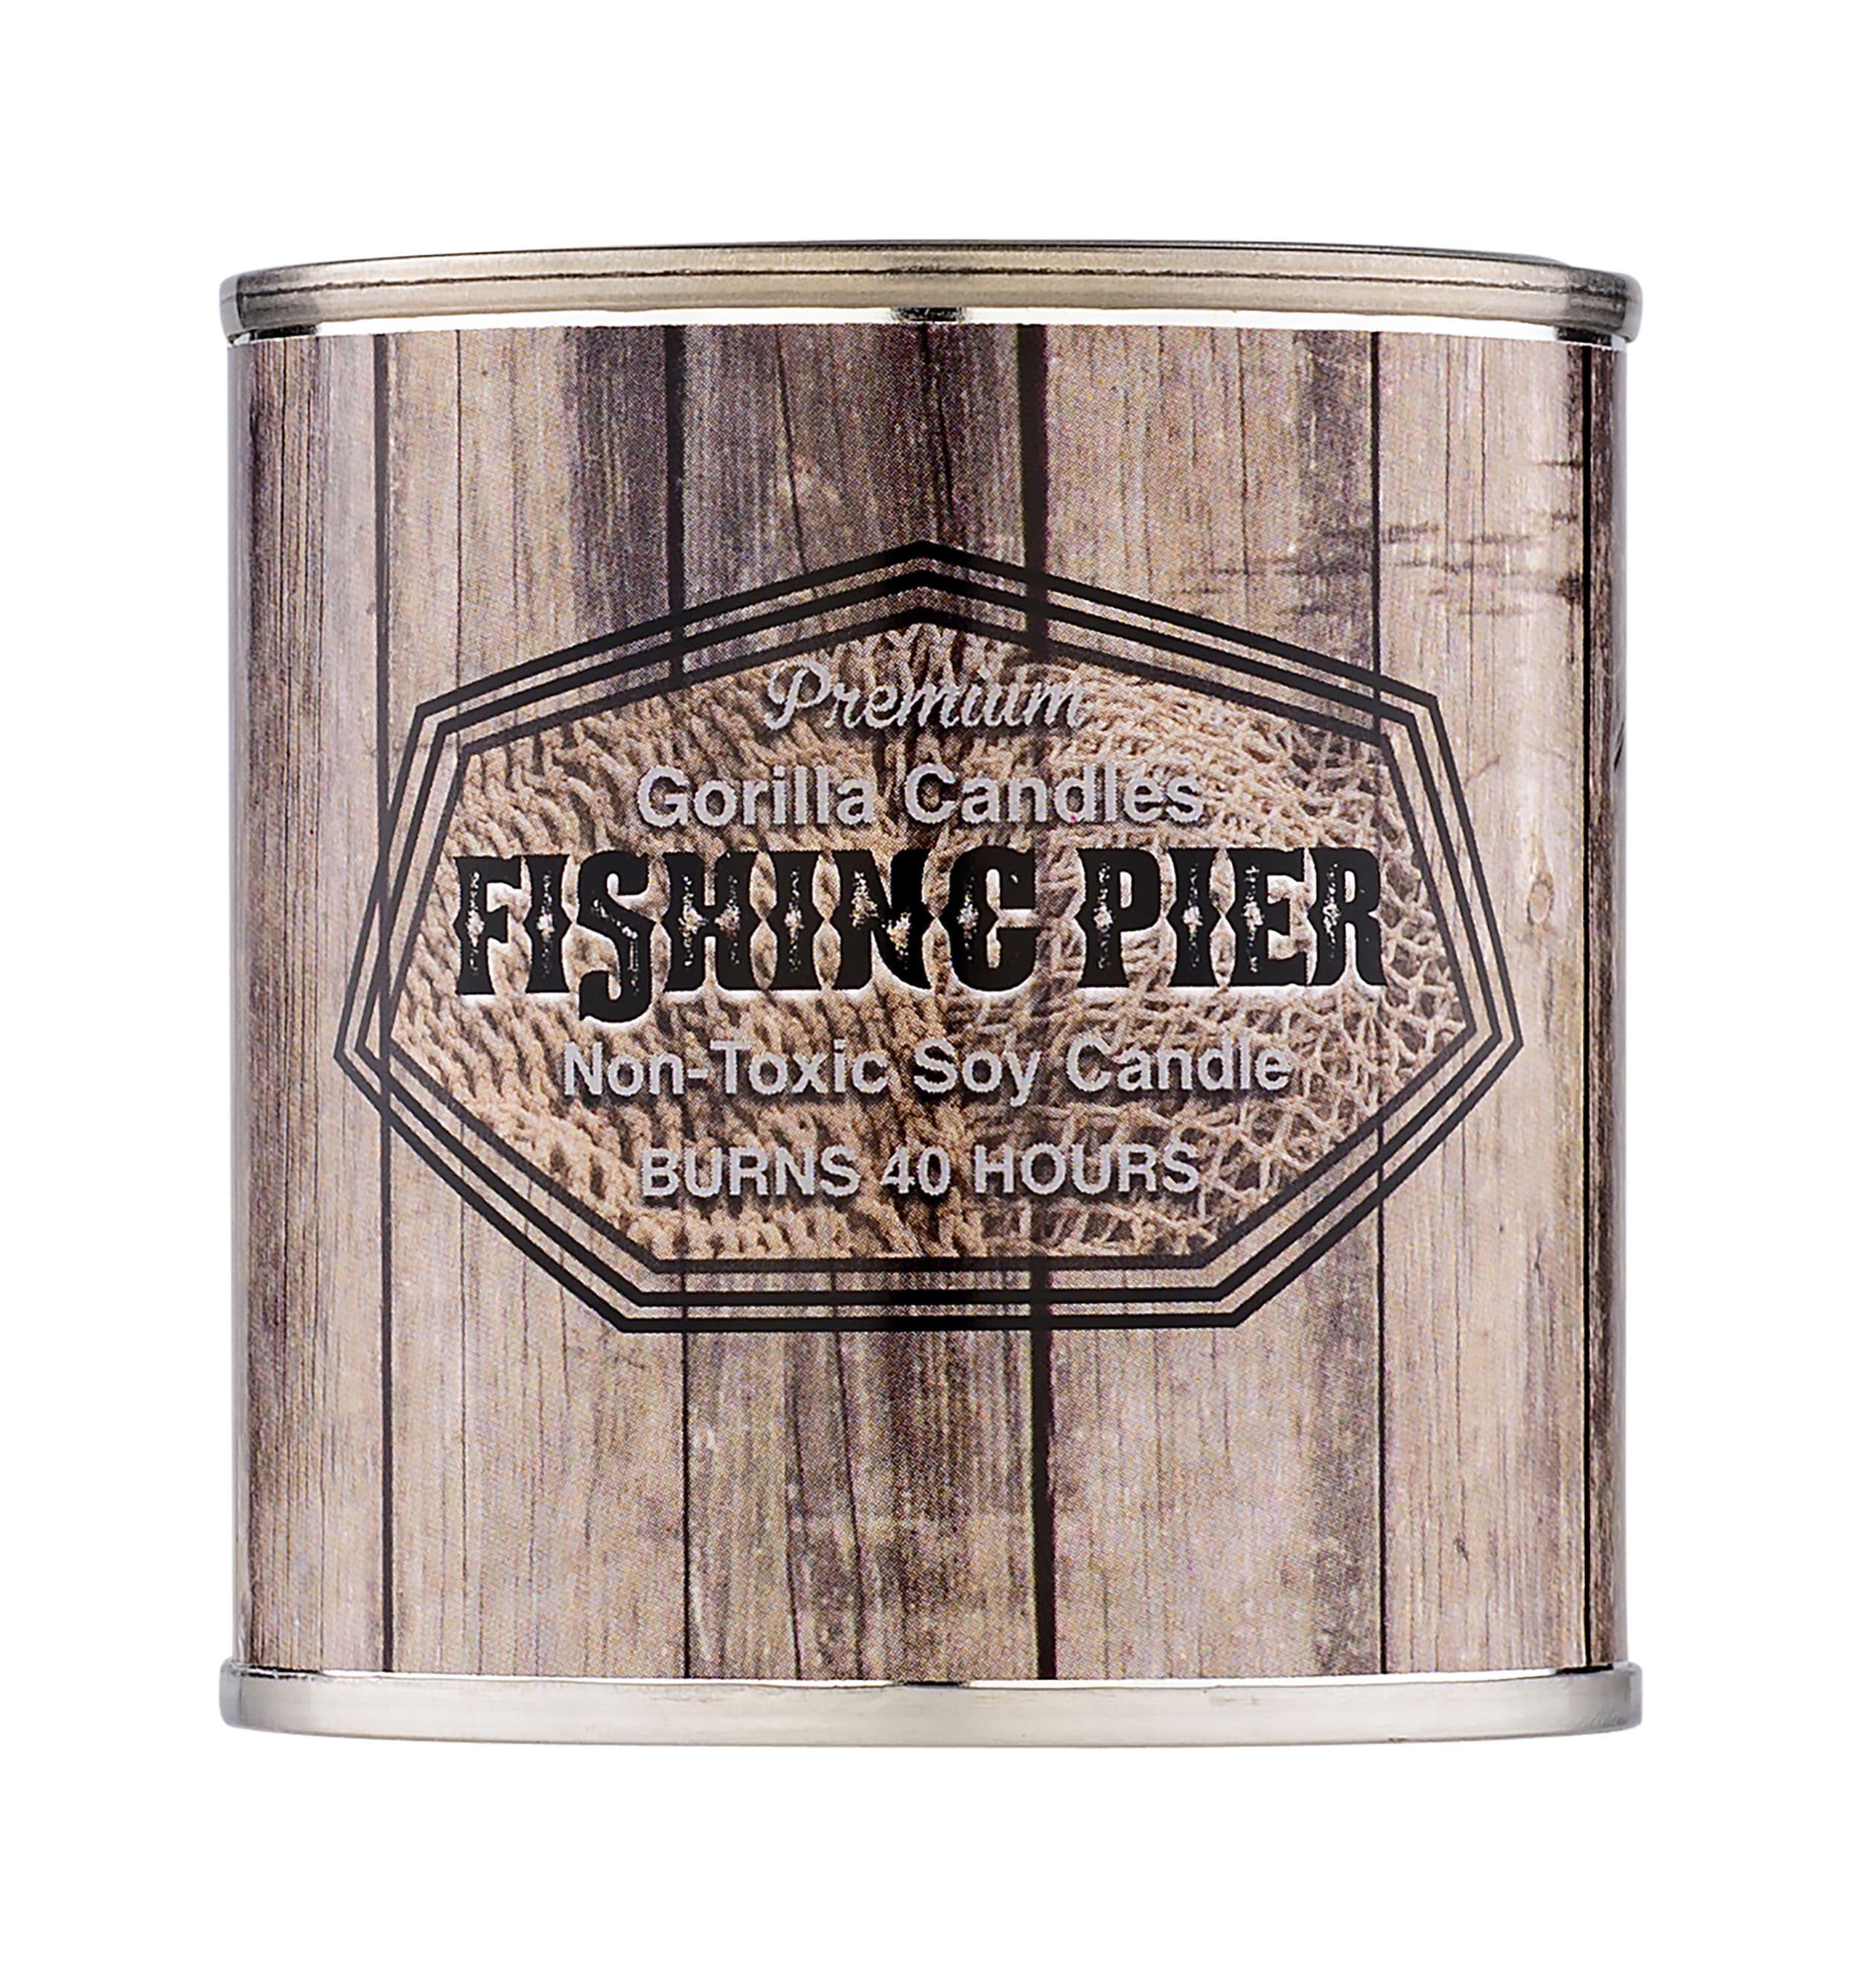 Fishing Pier Scent - Man Candle Bait Shop Collection Hunting Fishing Candle